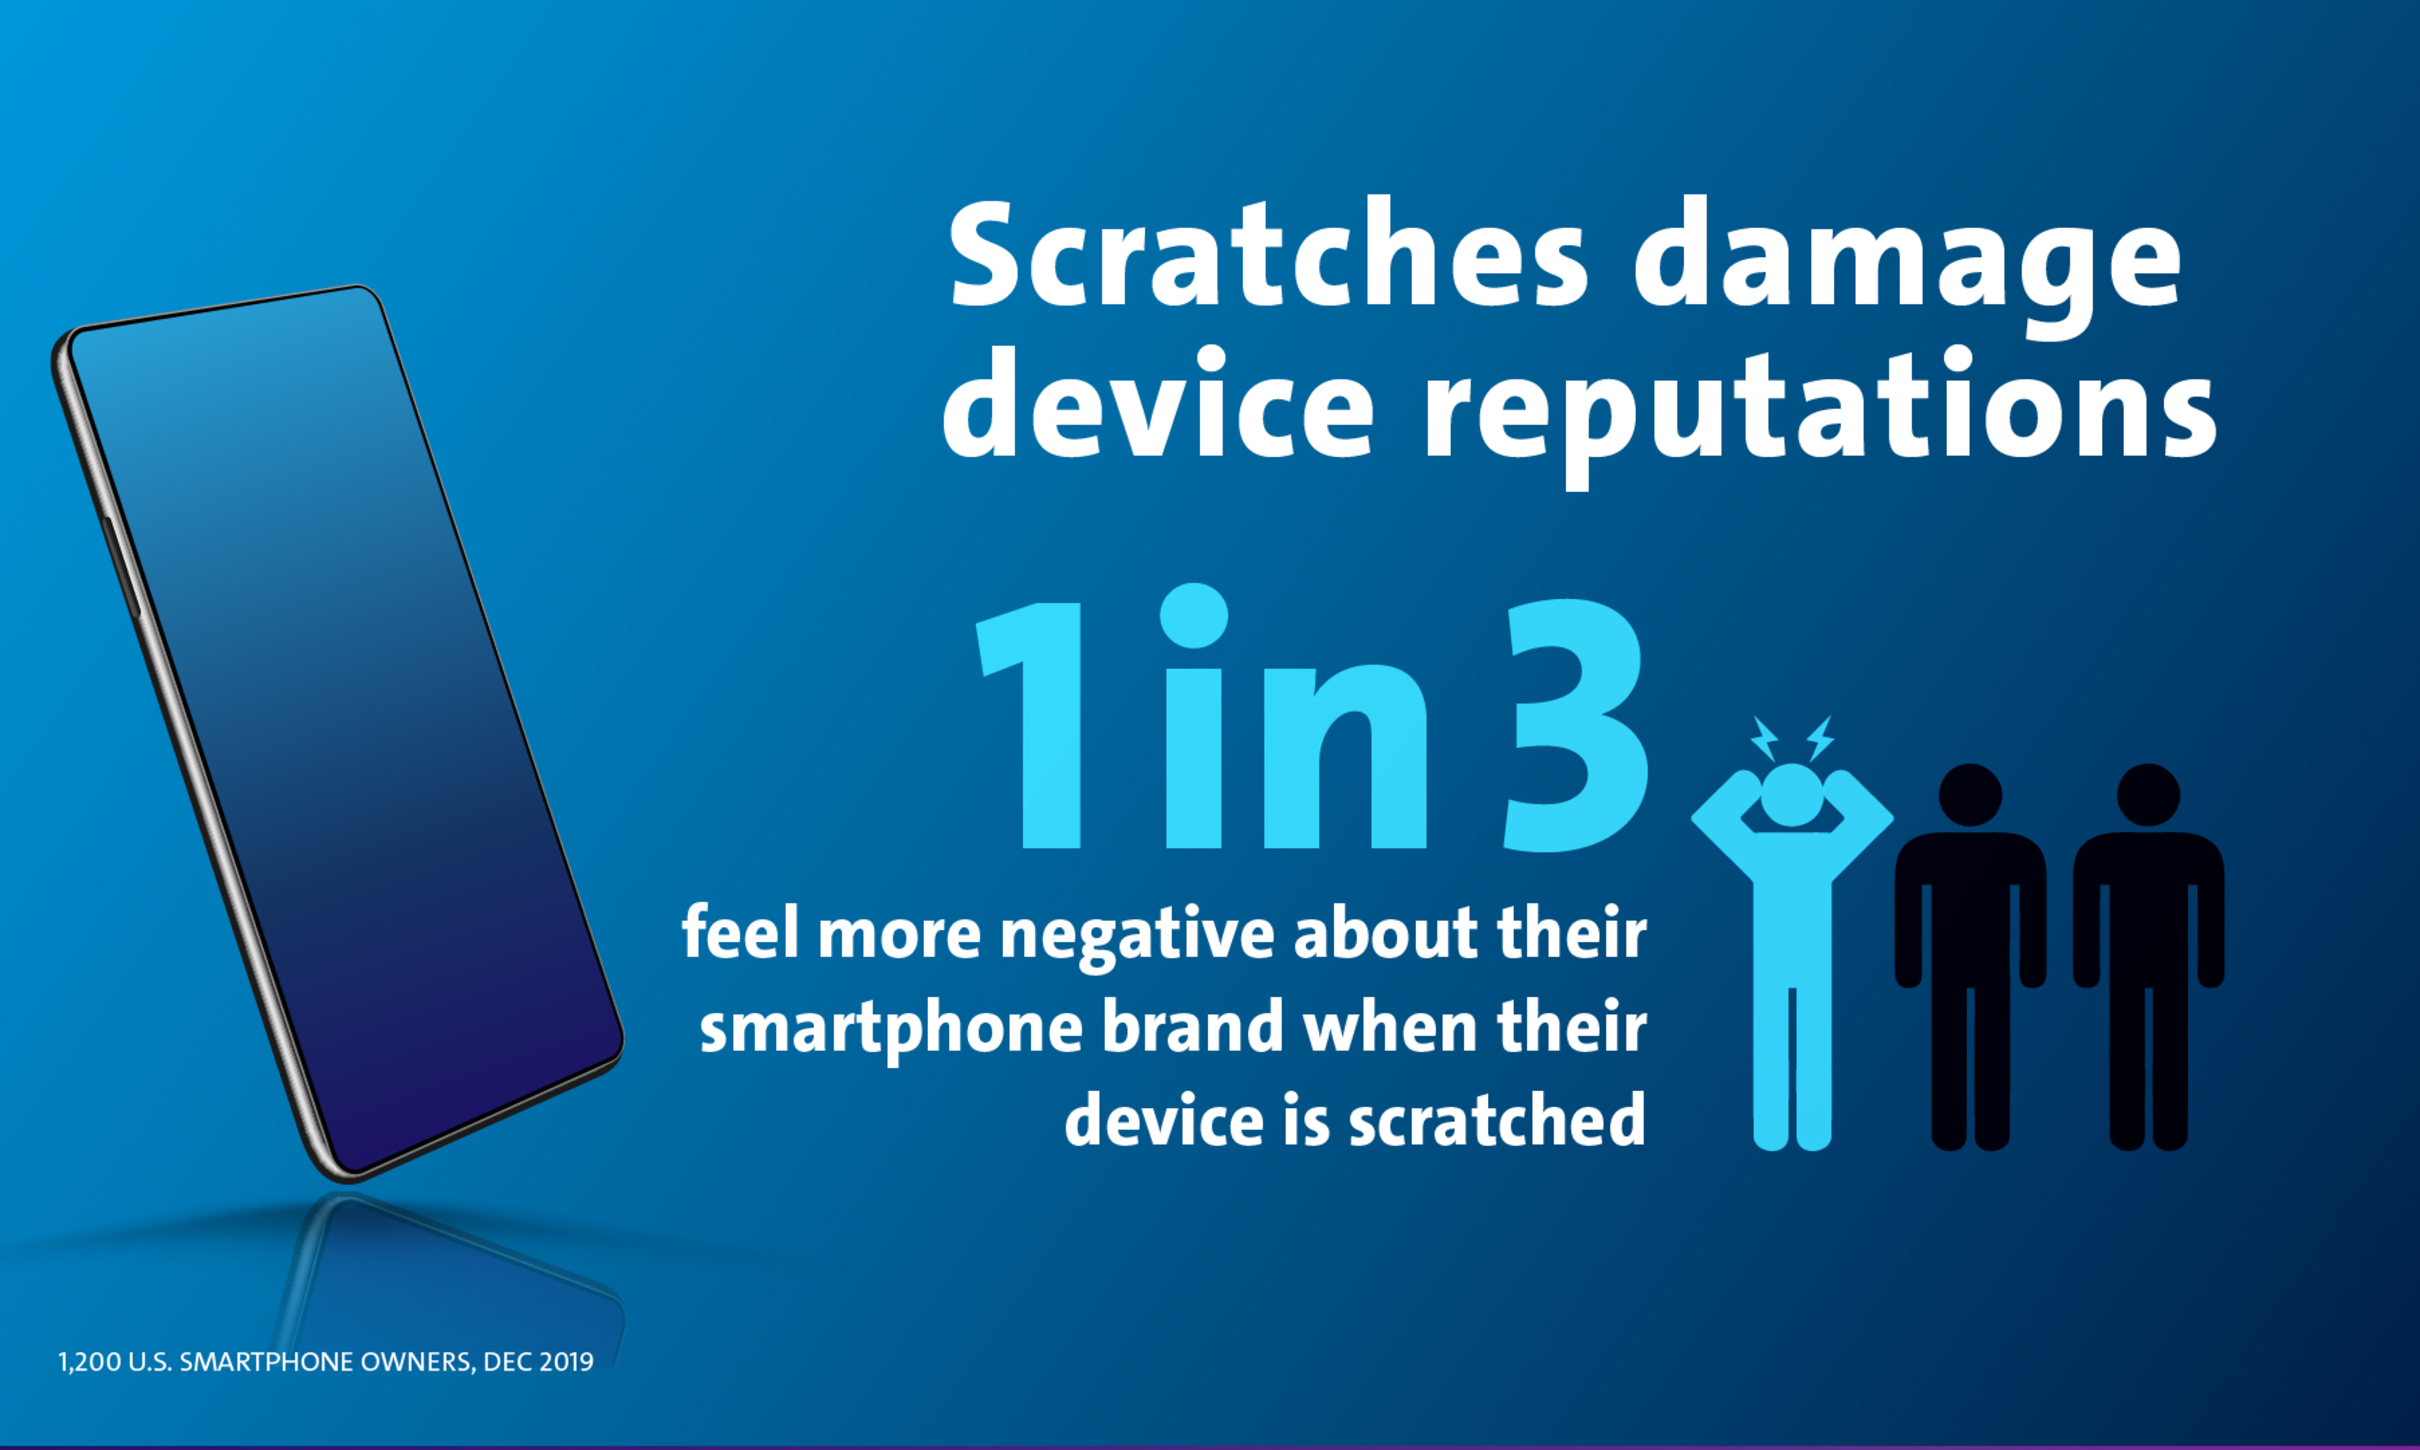 Scratches damage device reputations